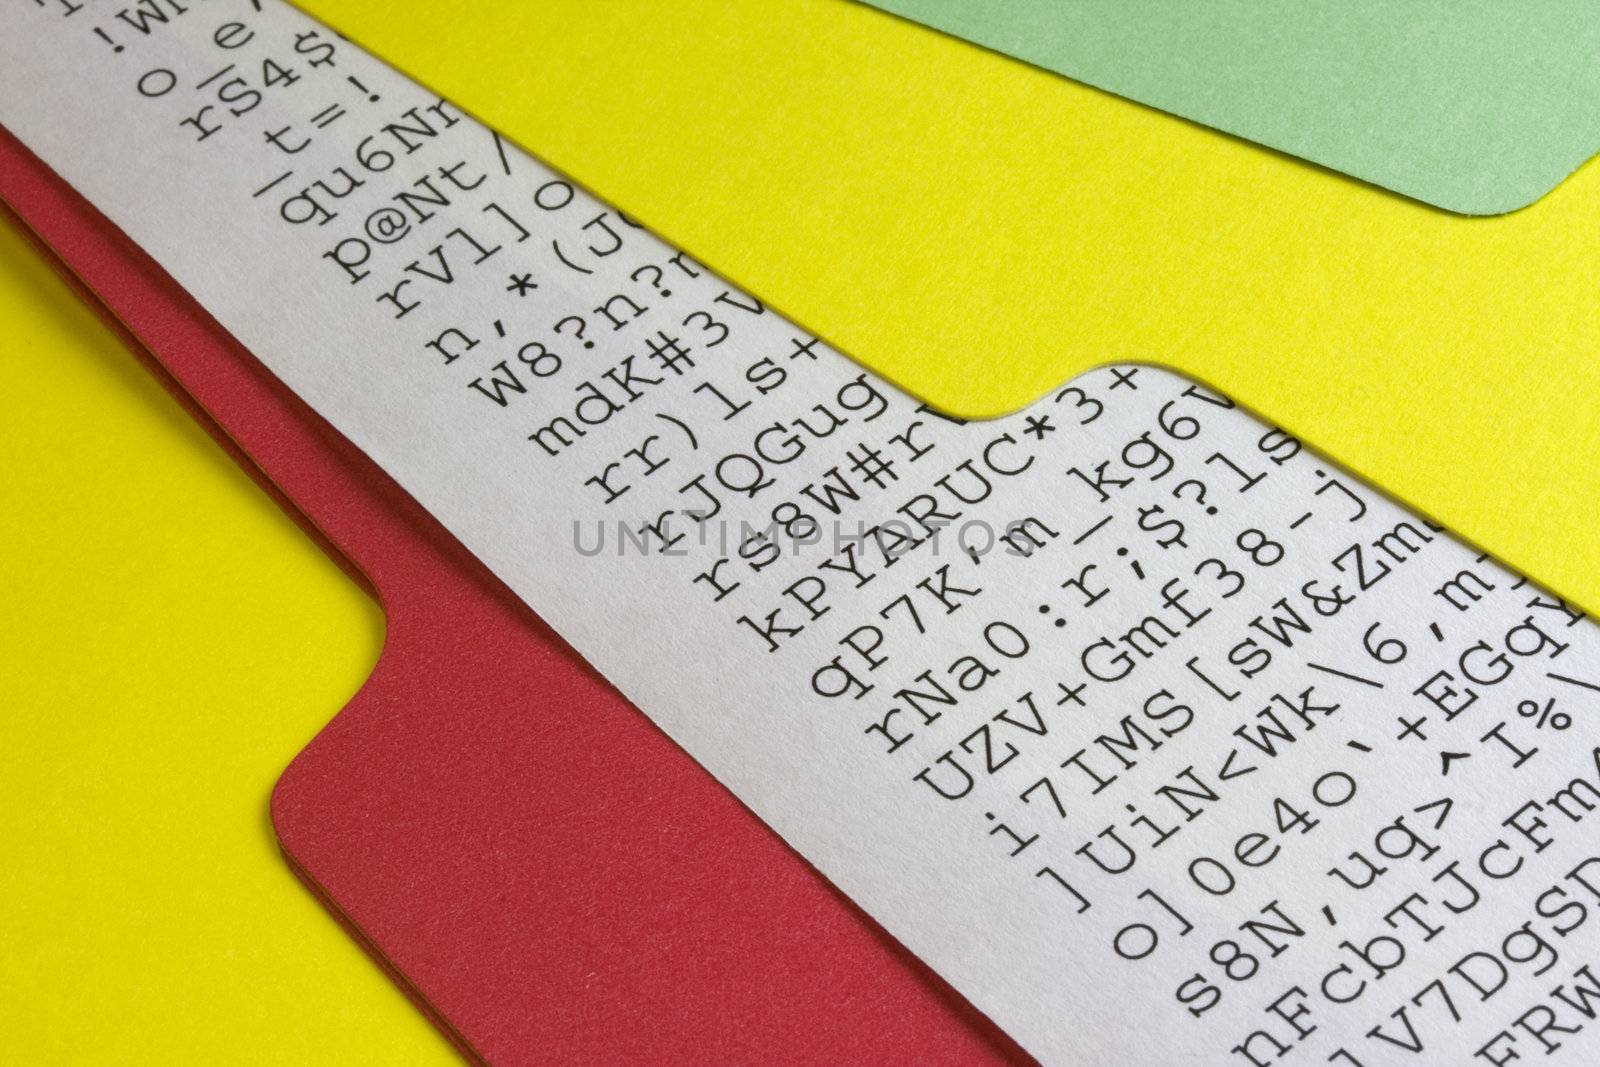 gibberish document, meaningless computer printout, sticking out of colorful file folders